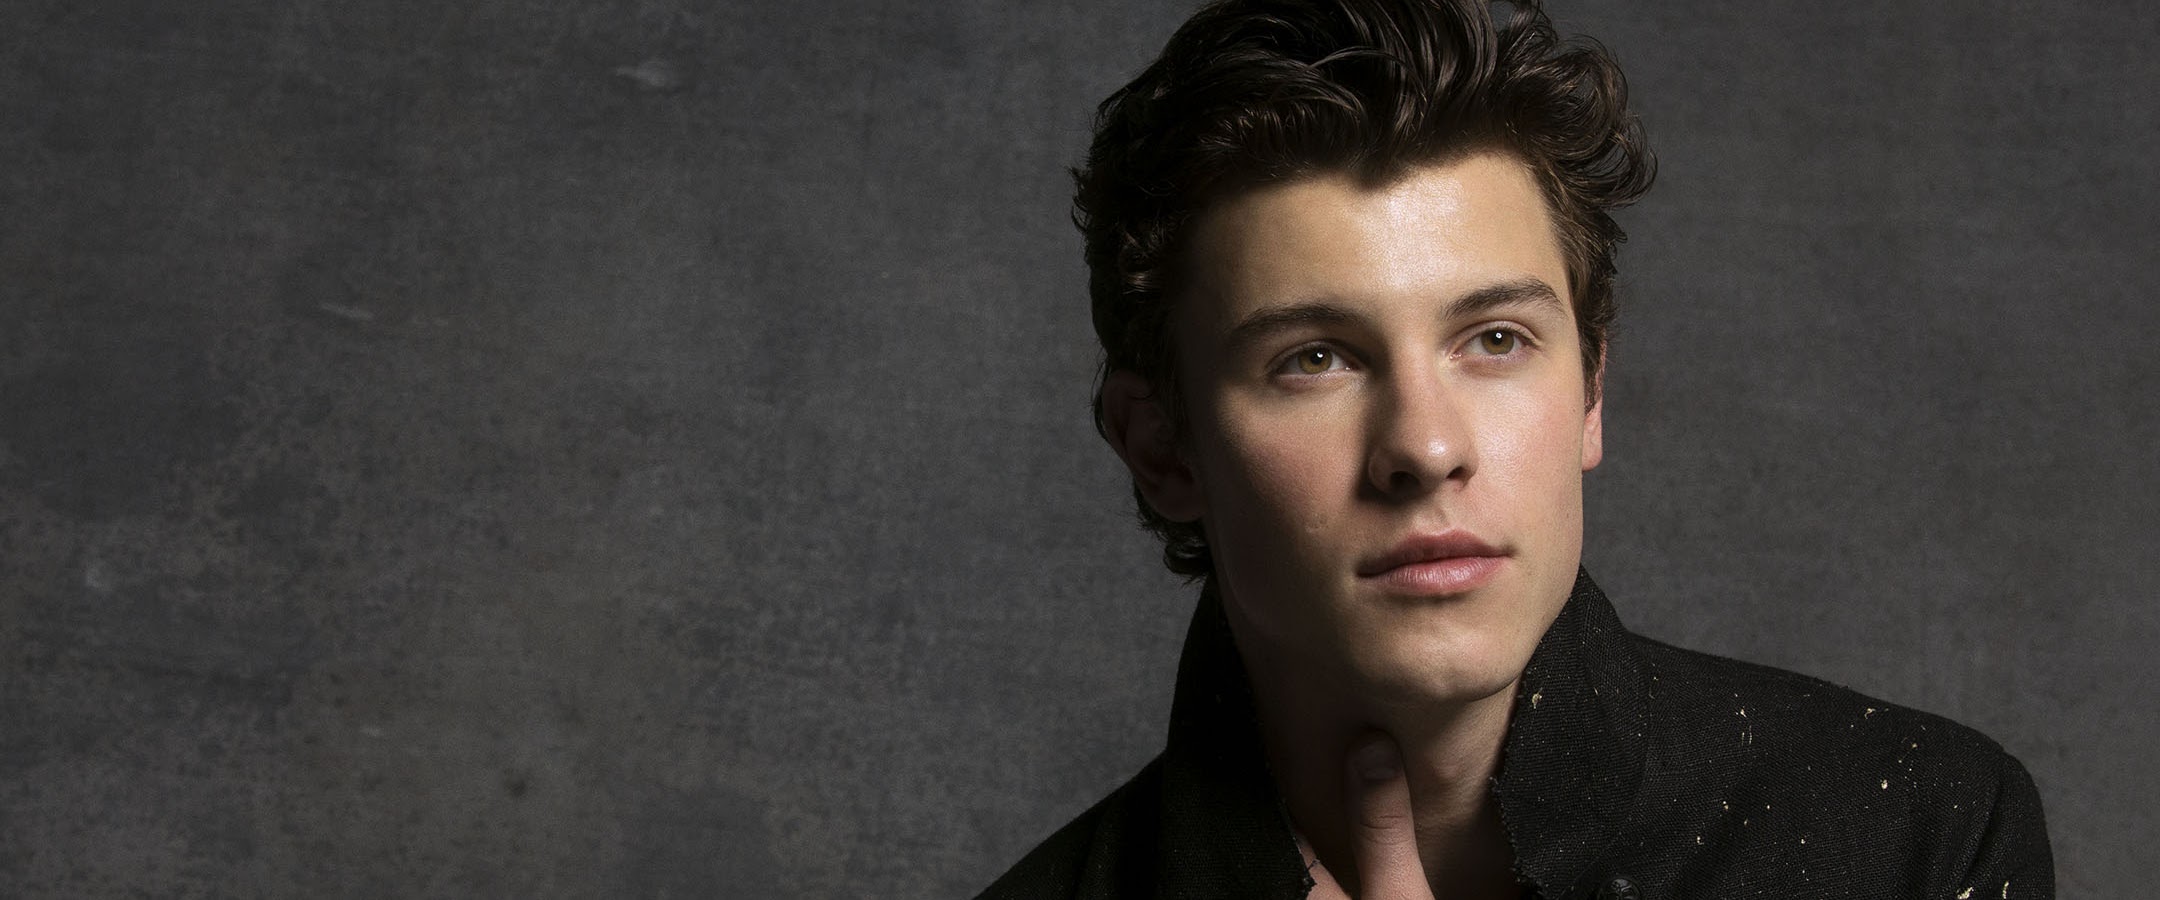 Youtube Success Story: Shawn Mendes – From YouTube to Global Superstar